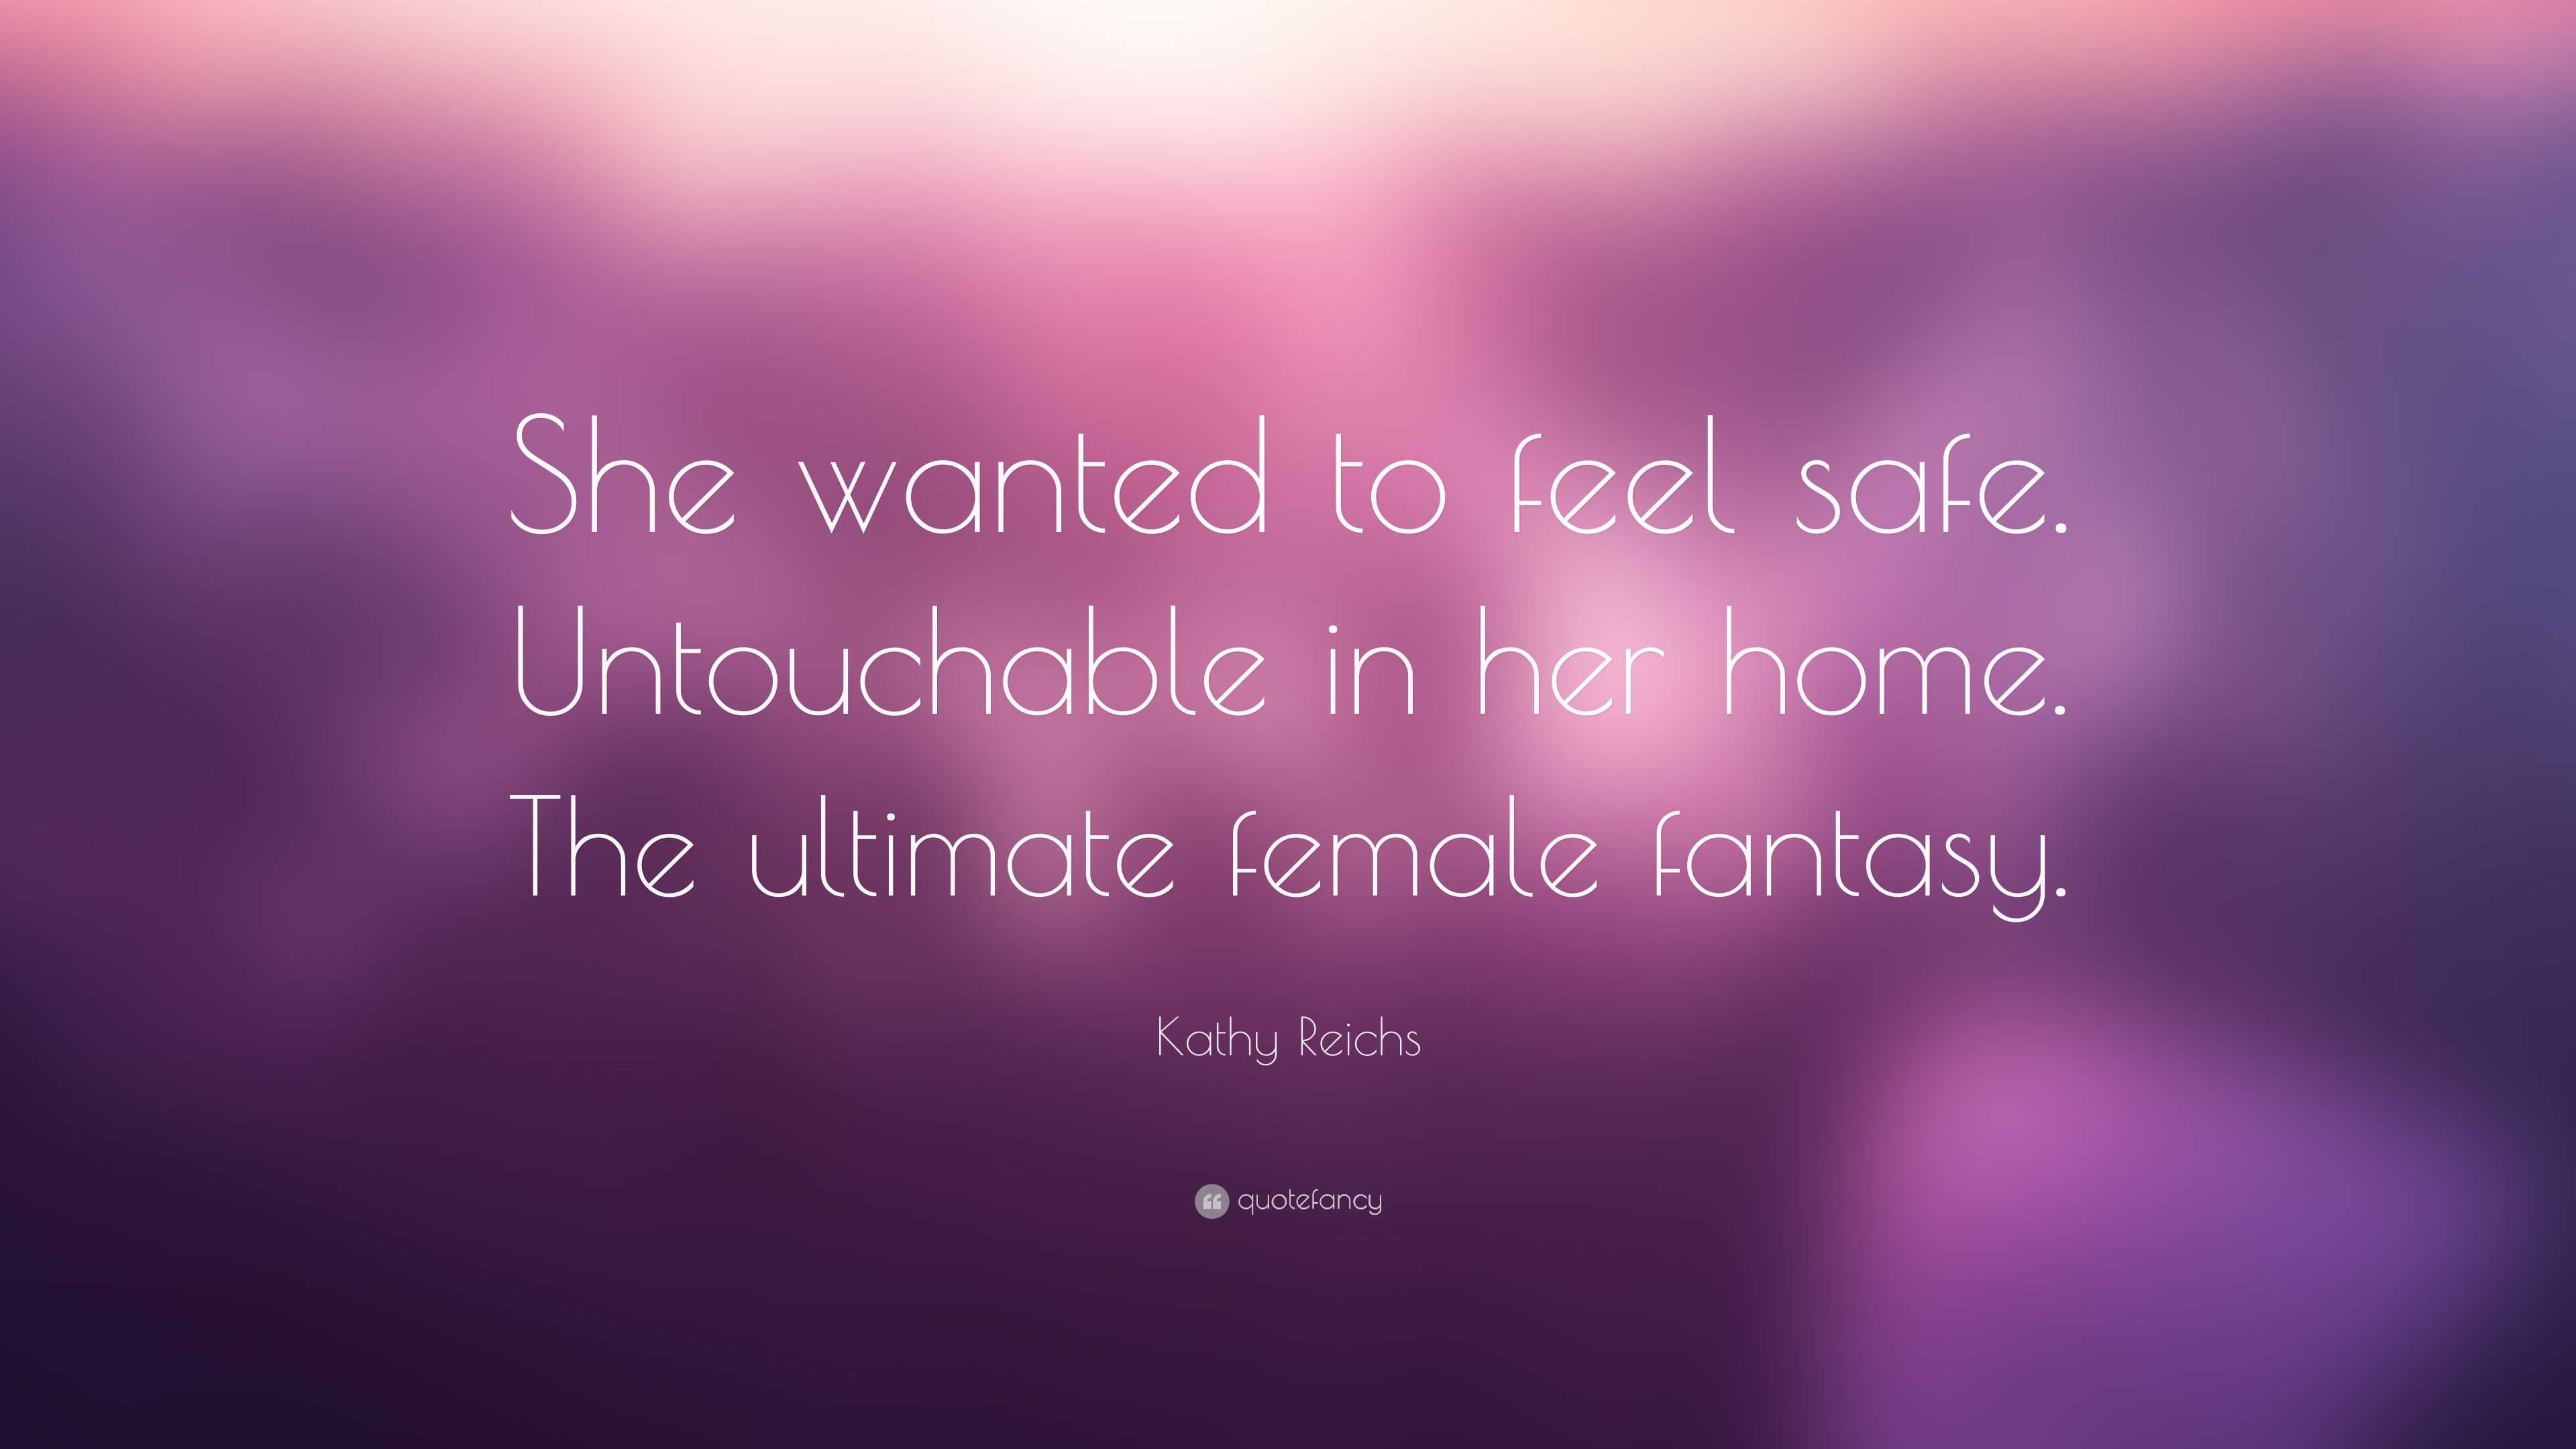 Kathy Reichs Quote: “She wanted to feel safe. Untouchable in her home ...